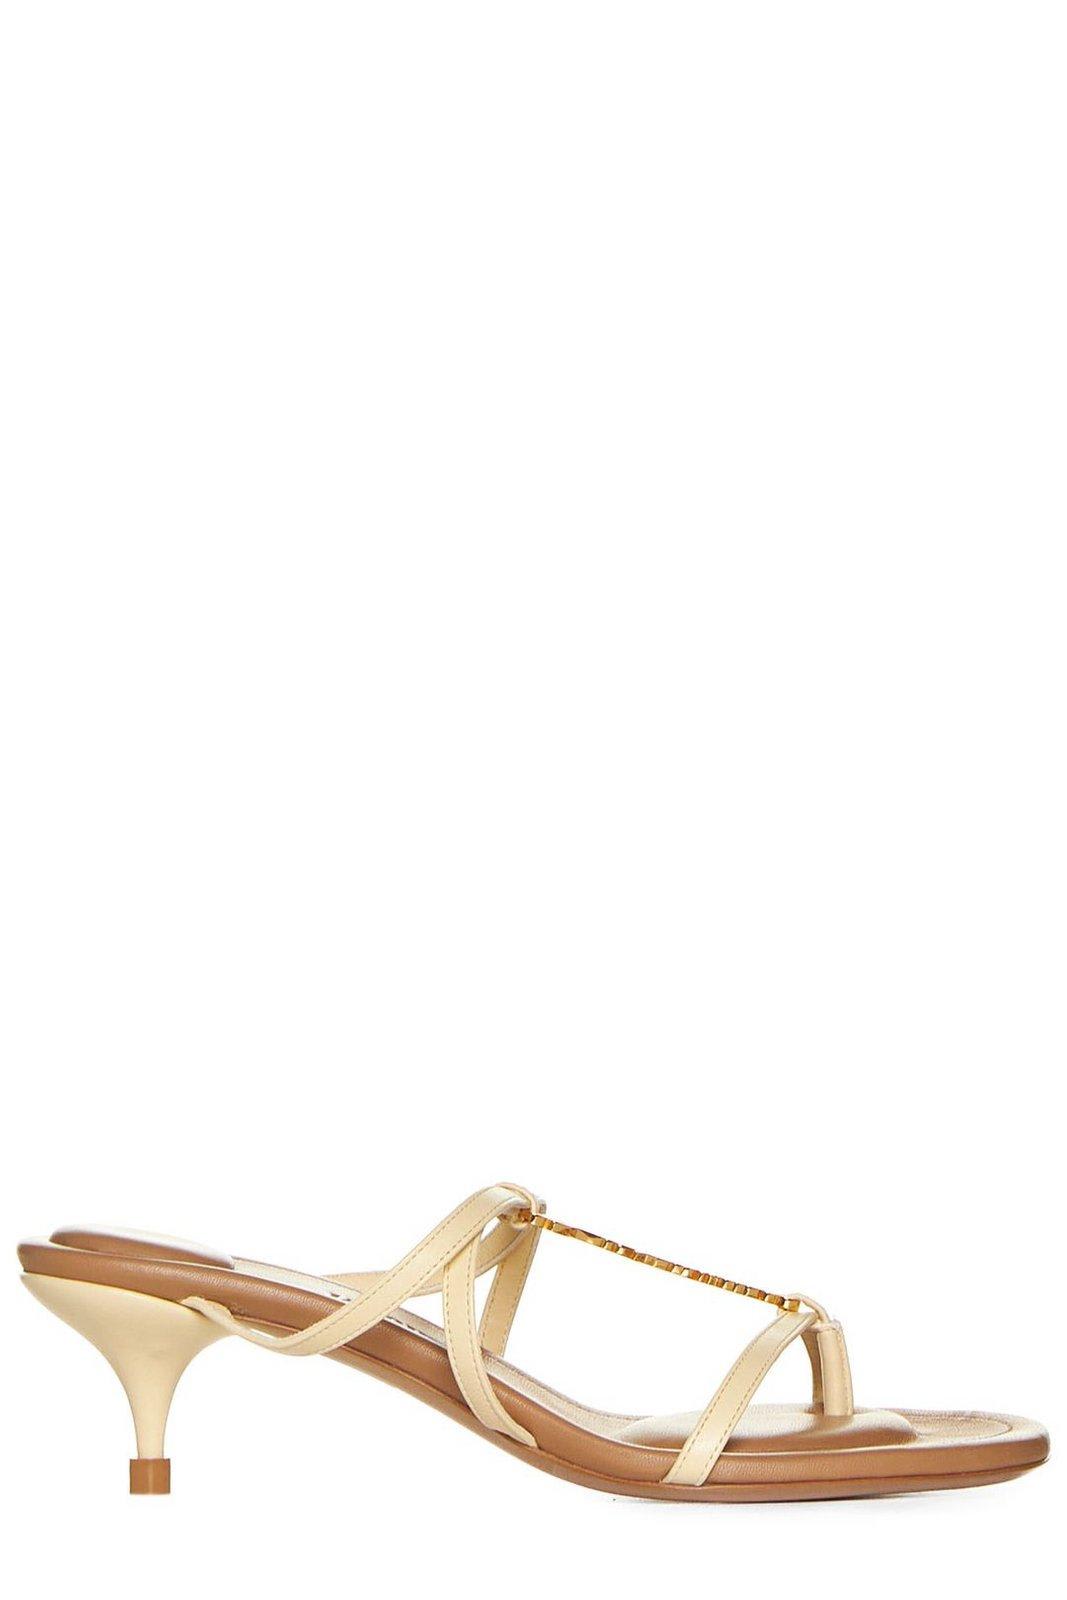 JACQUEMUS STRAPPY CHARM MULES